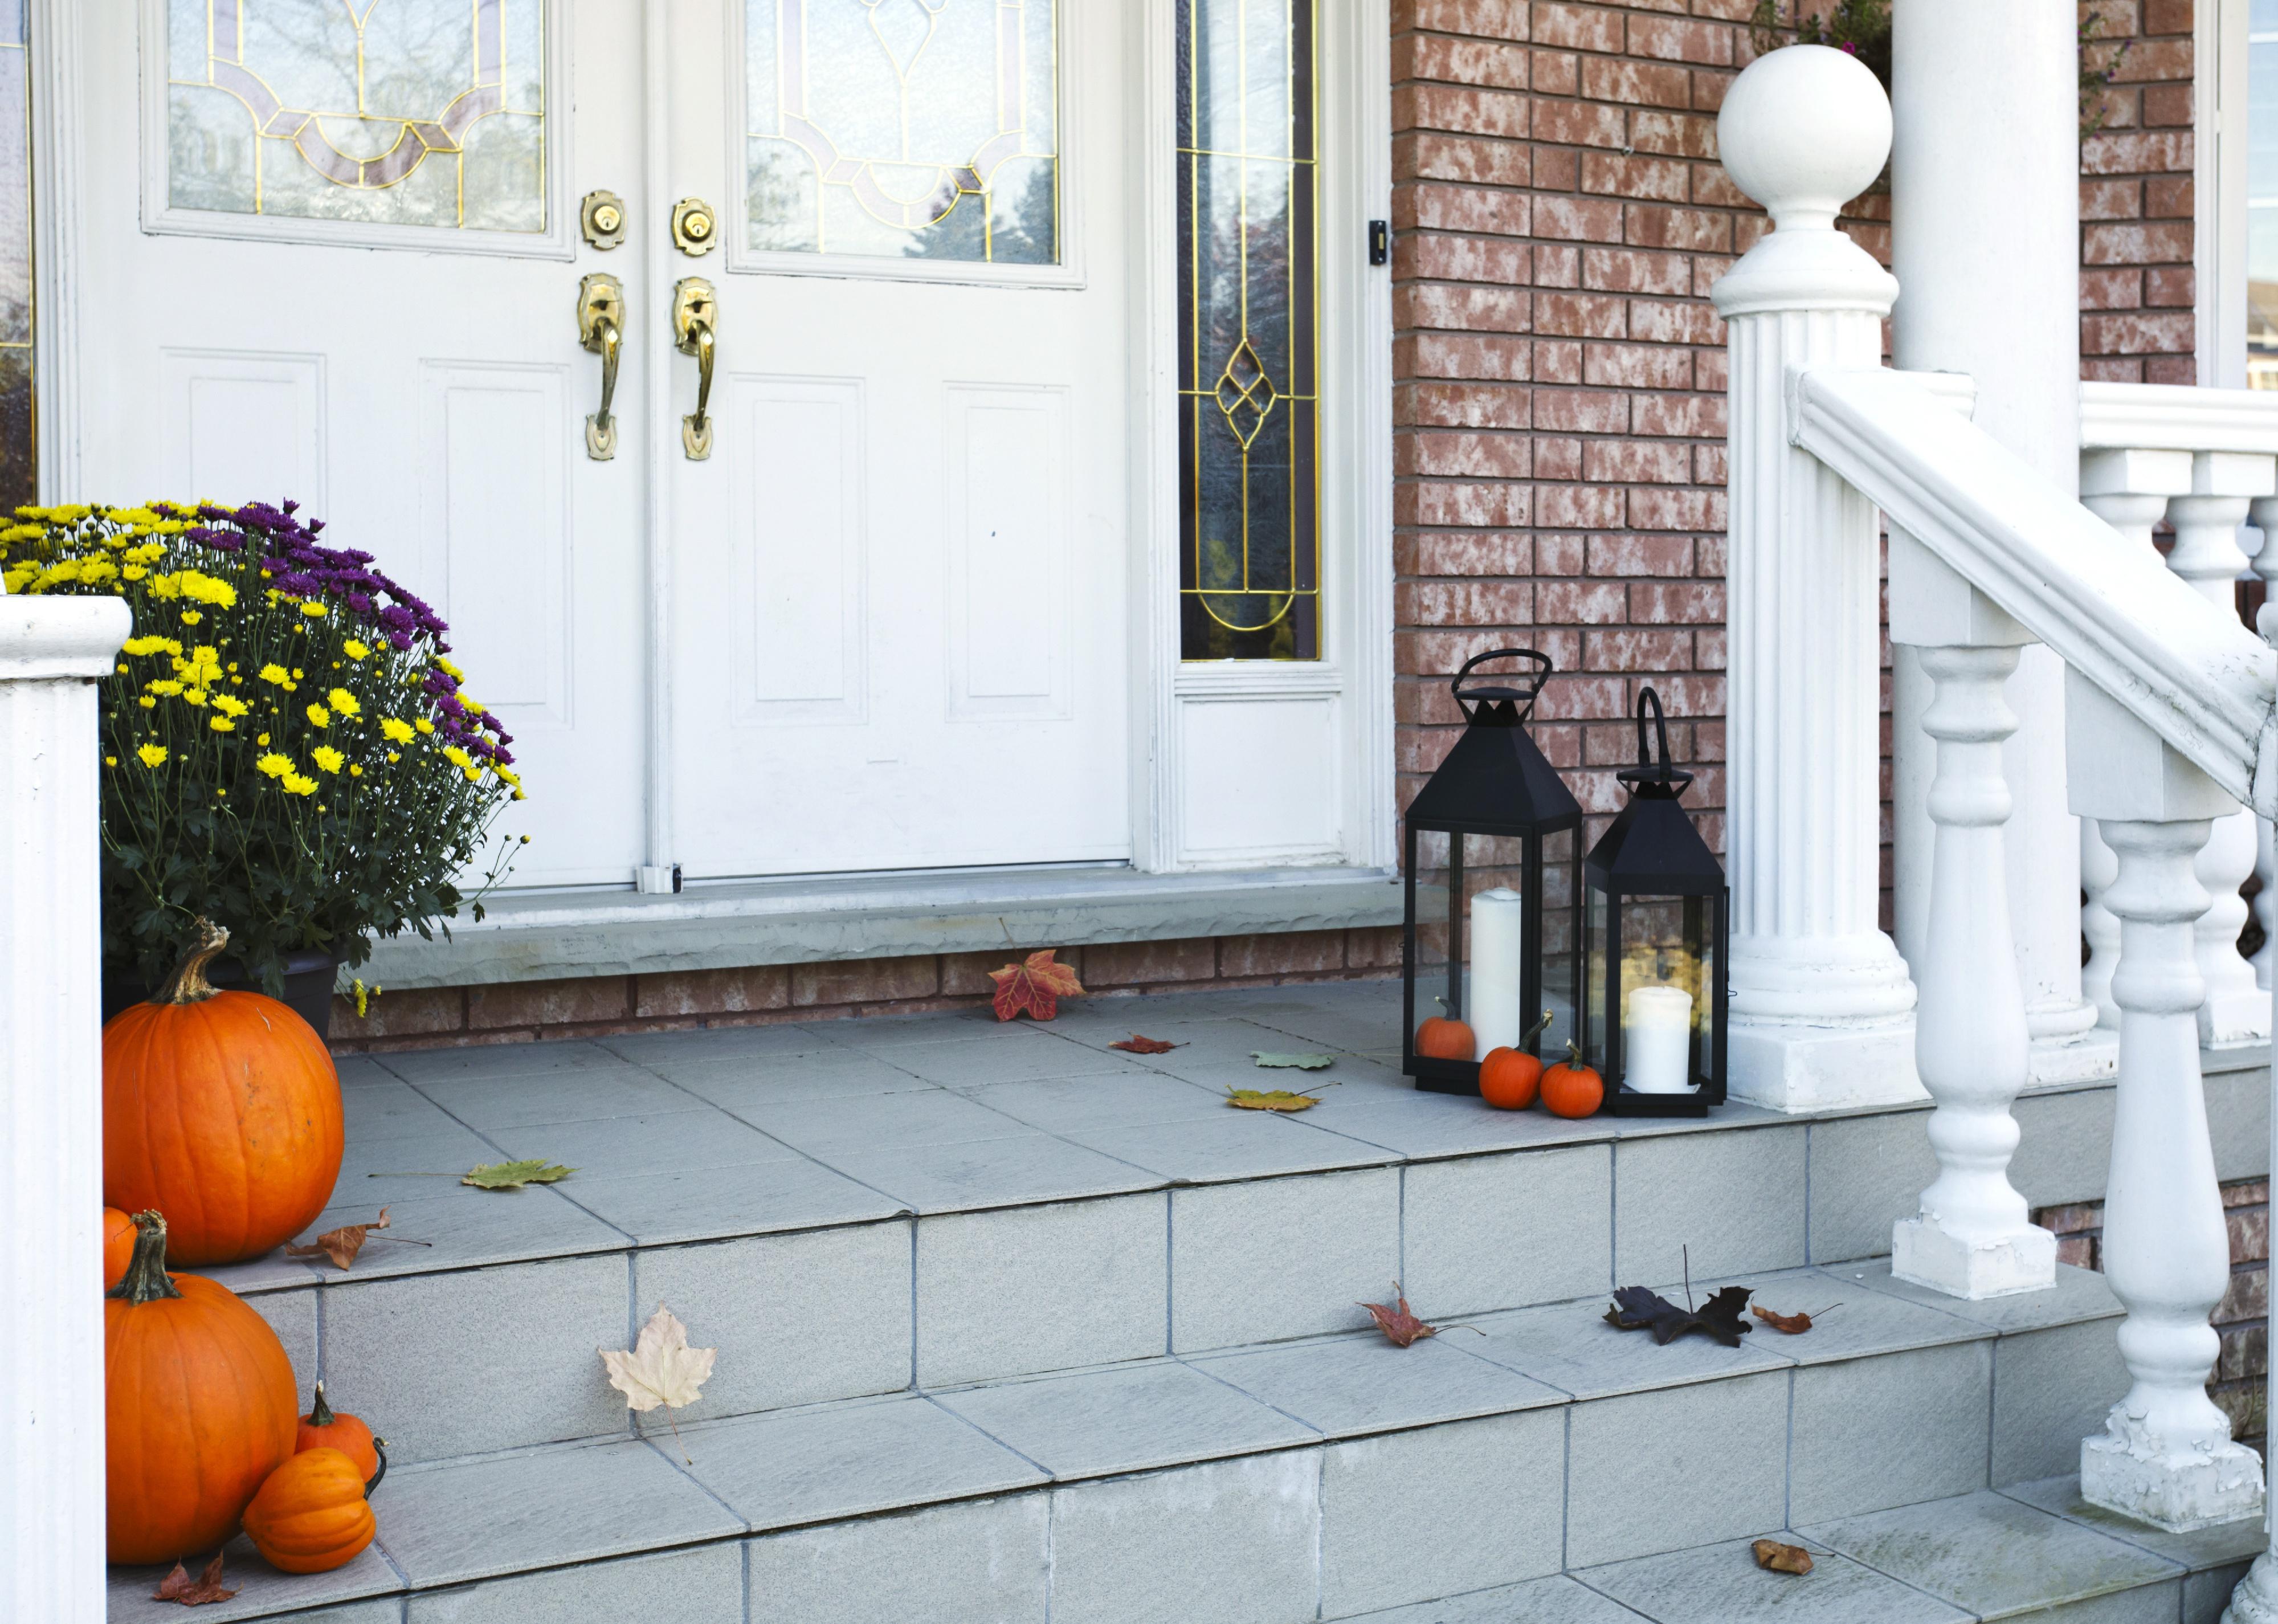 Pumpkins and leaves on a front porch.